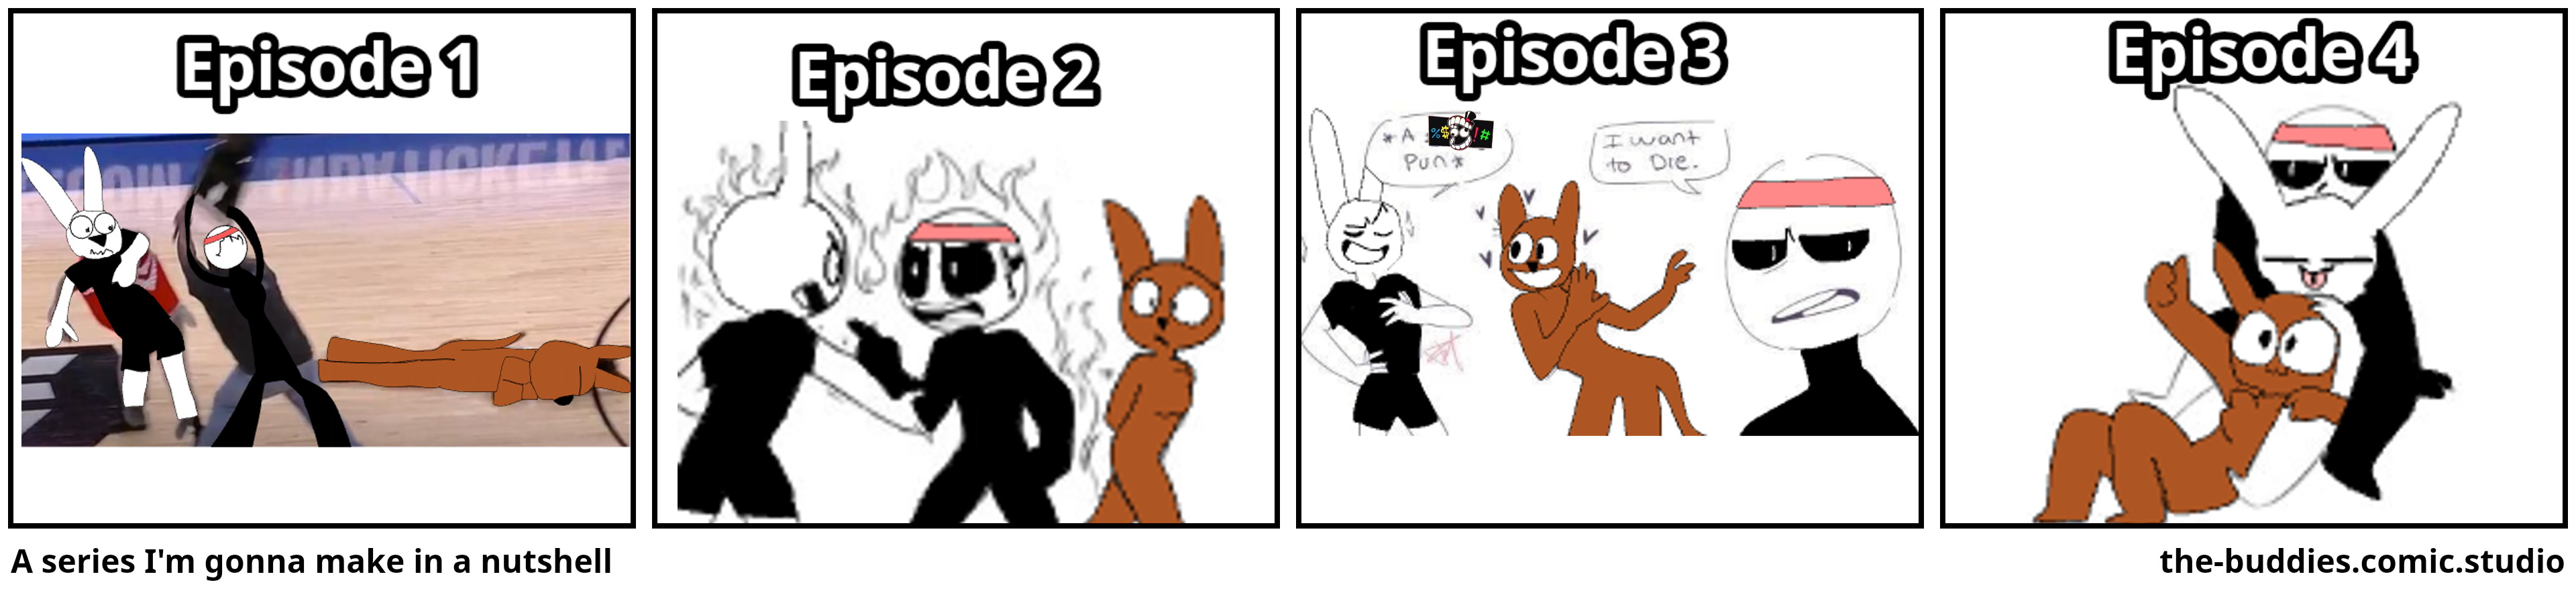 A series I'm gonna make in a nutshell